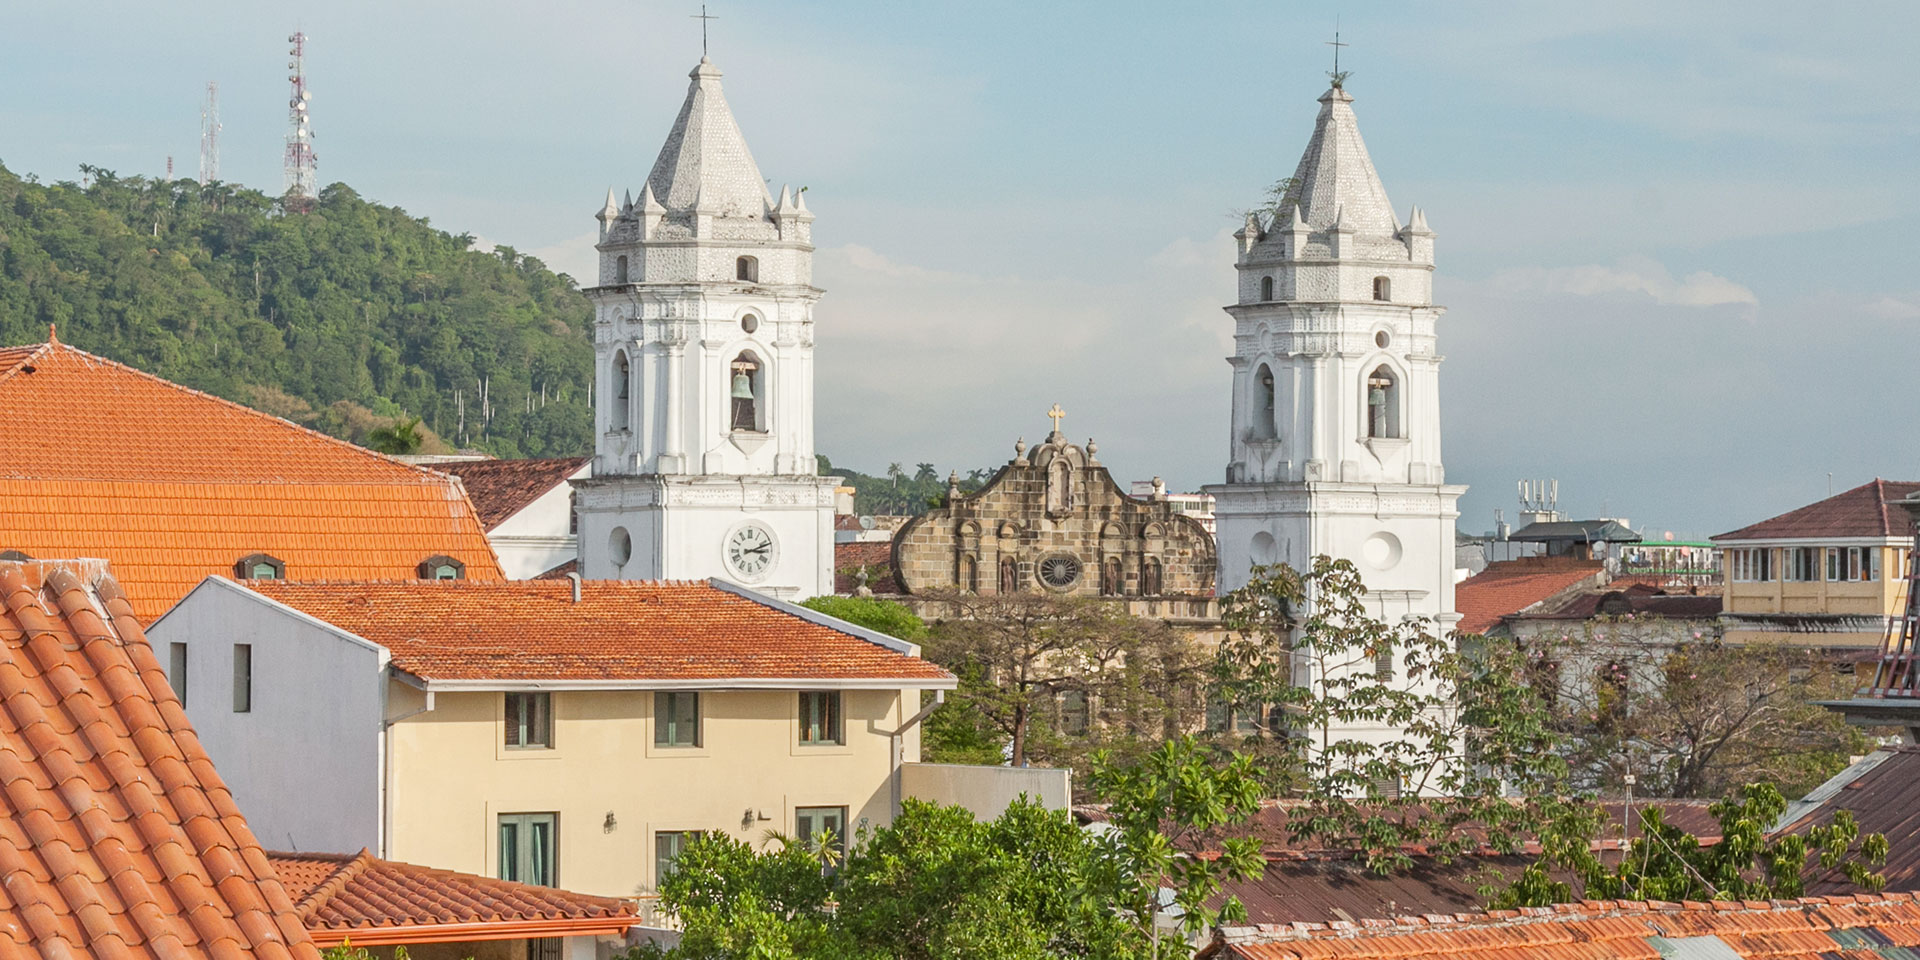 Shopping and Sightseeing in Casco Viejo, the Hippest ‘Hood in Panama City, Panama